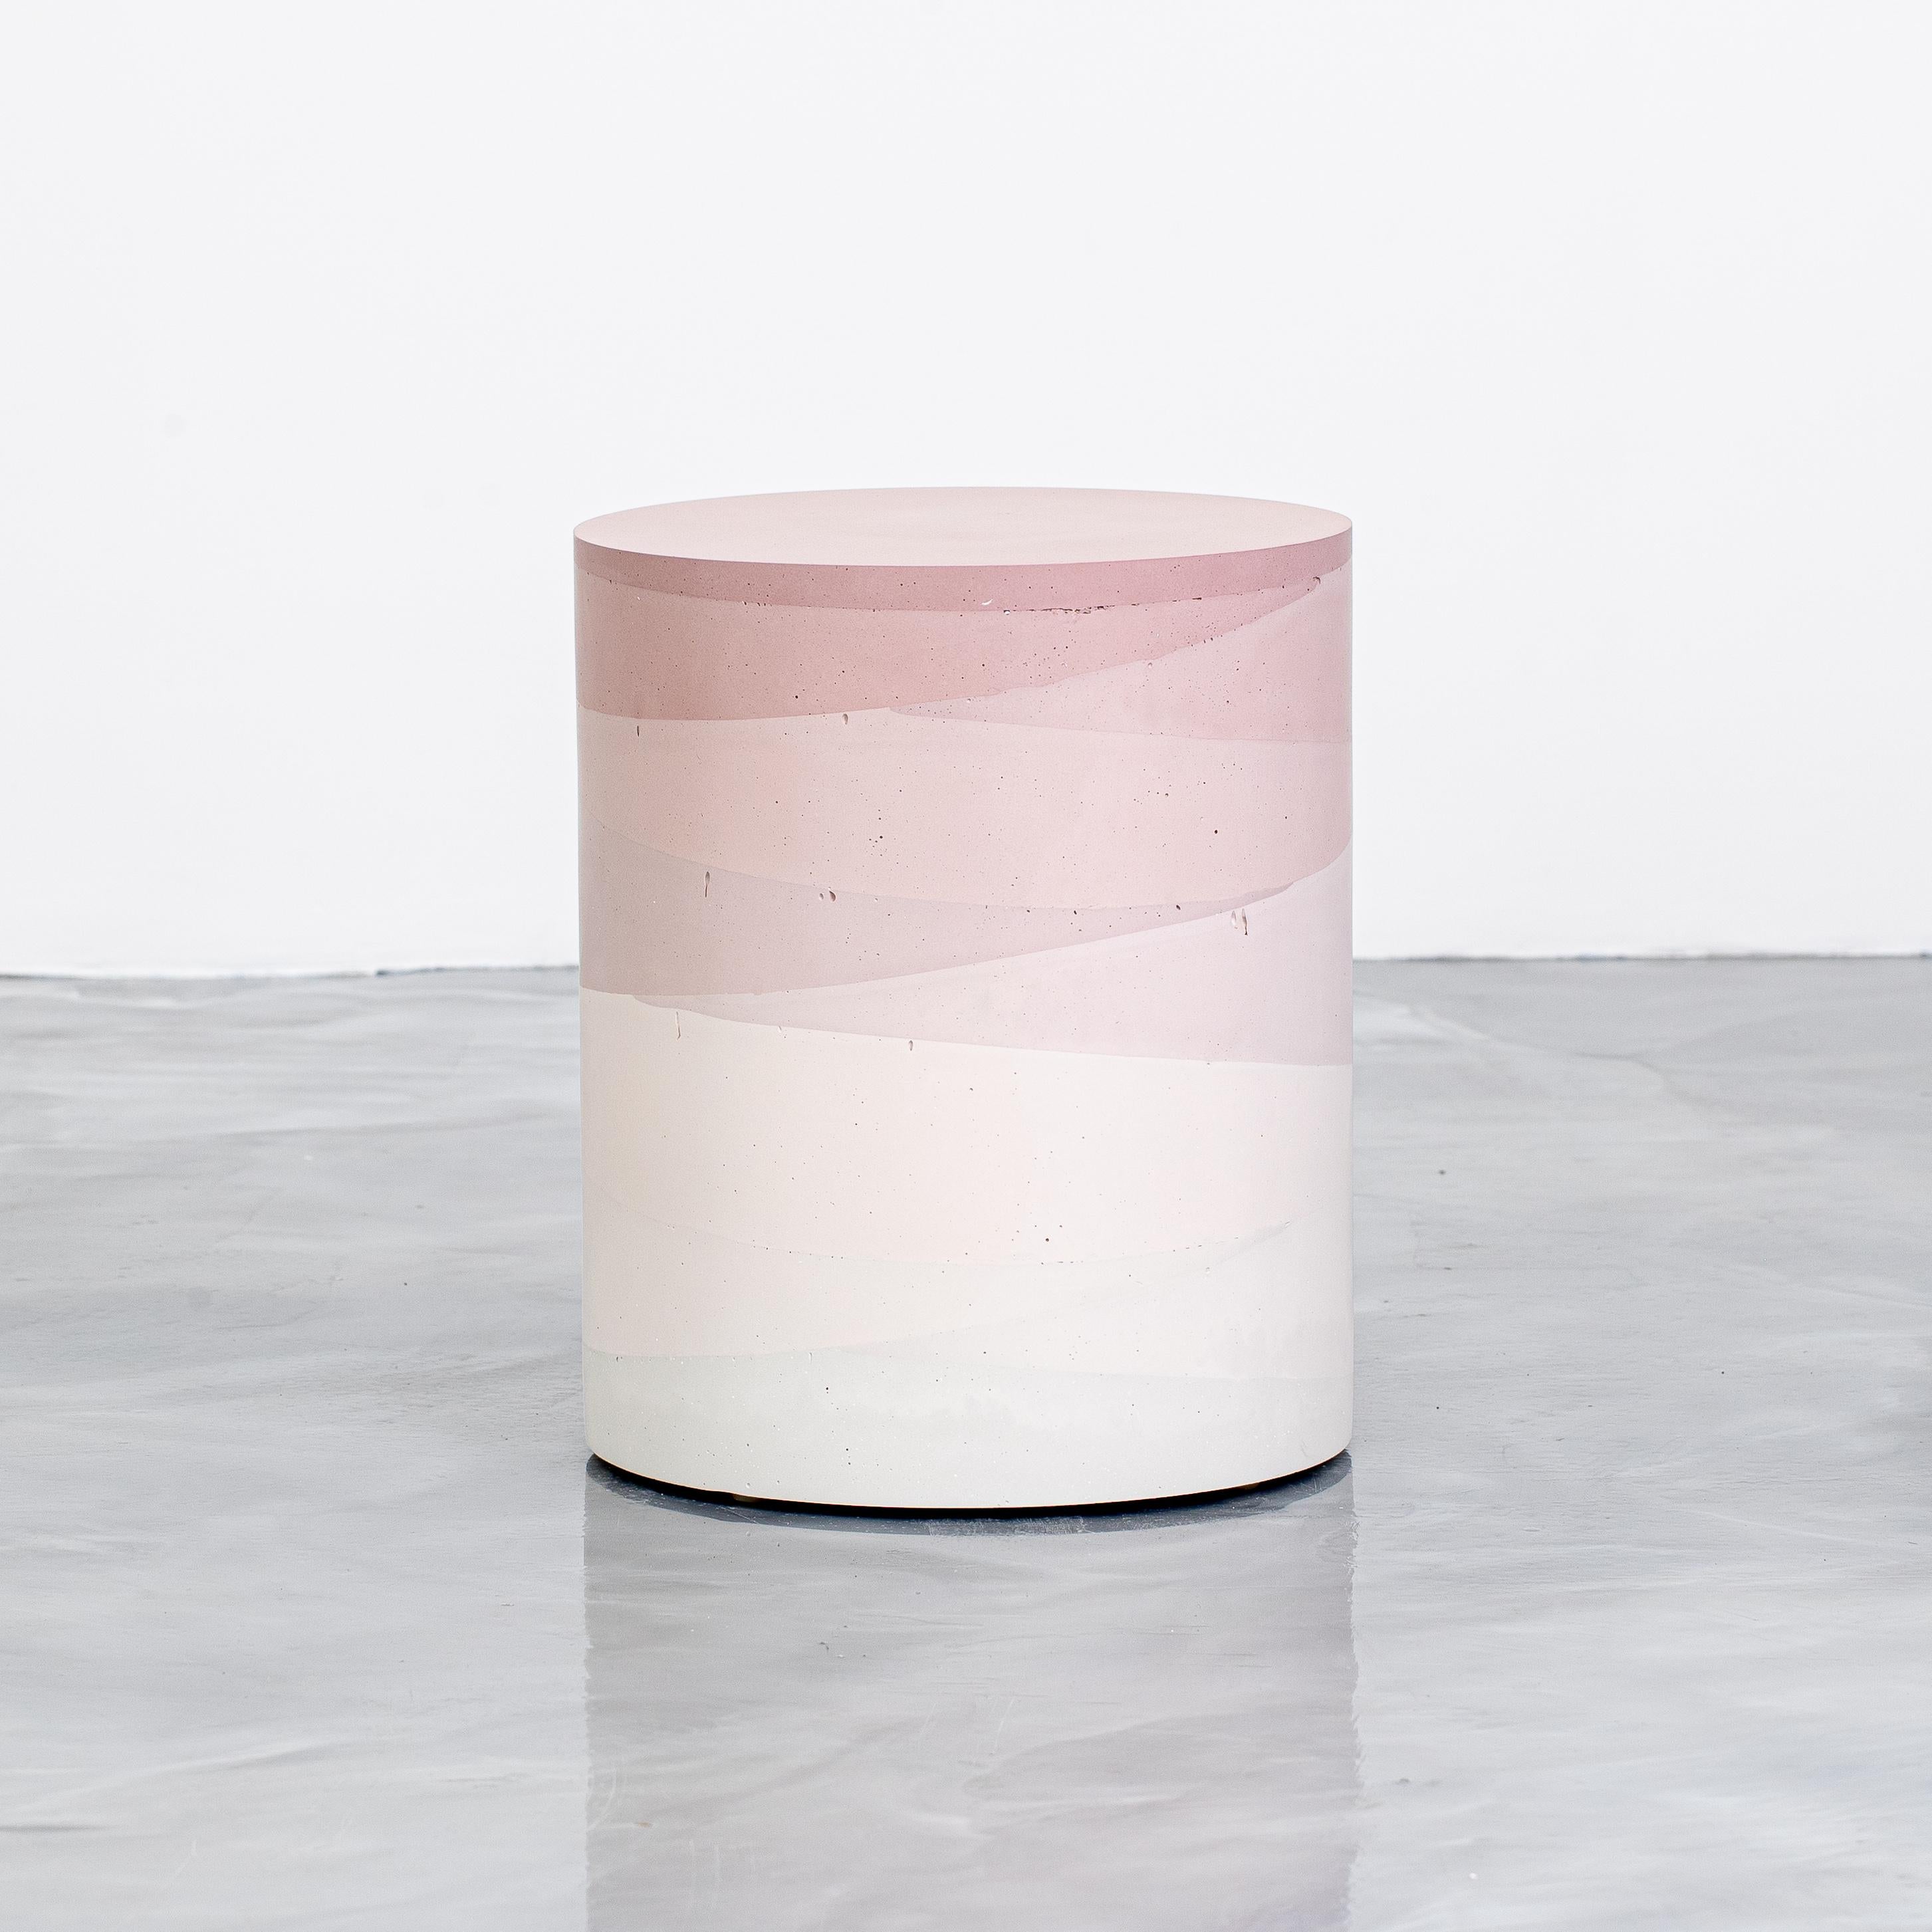 An exploration in the softness and subtly of the materials, the made-to-order drum has a hollow cavity and is cast entirely from hand-dyed cement. Poured in individual hand-dyed layers, starting from the base color blush and fading to white, the